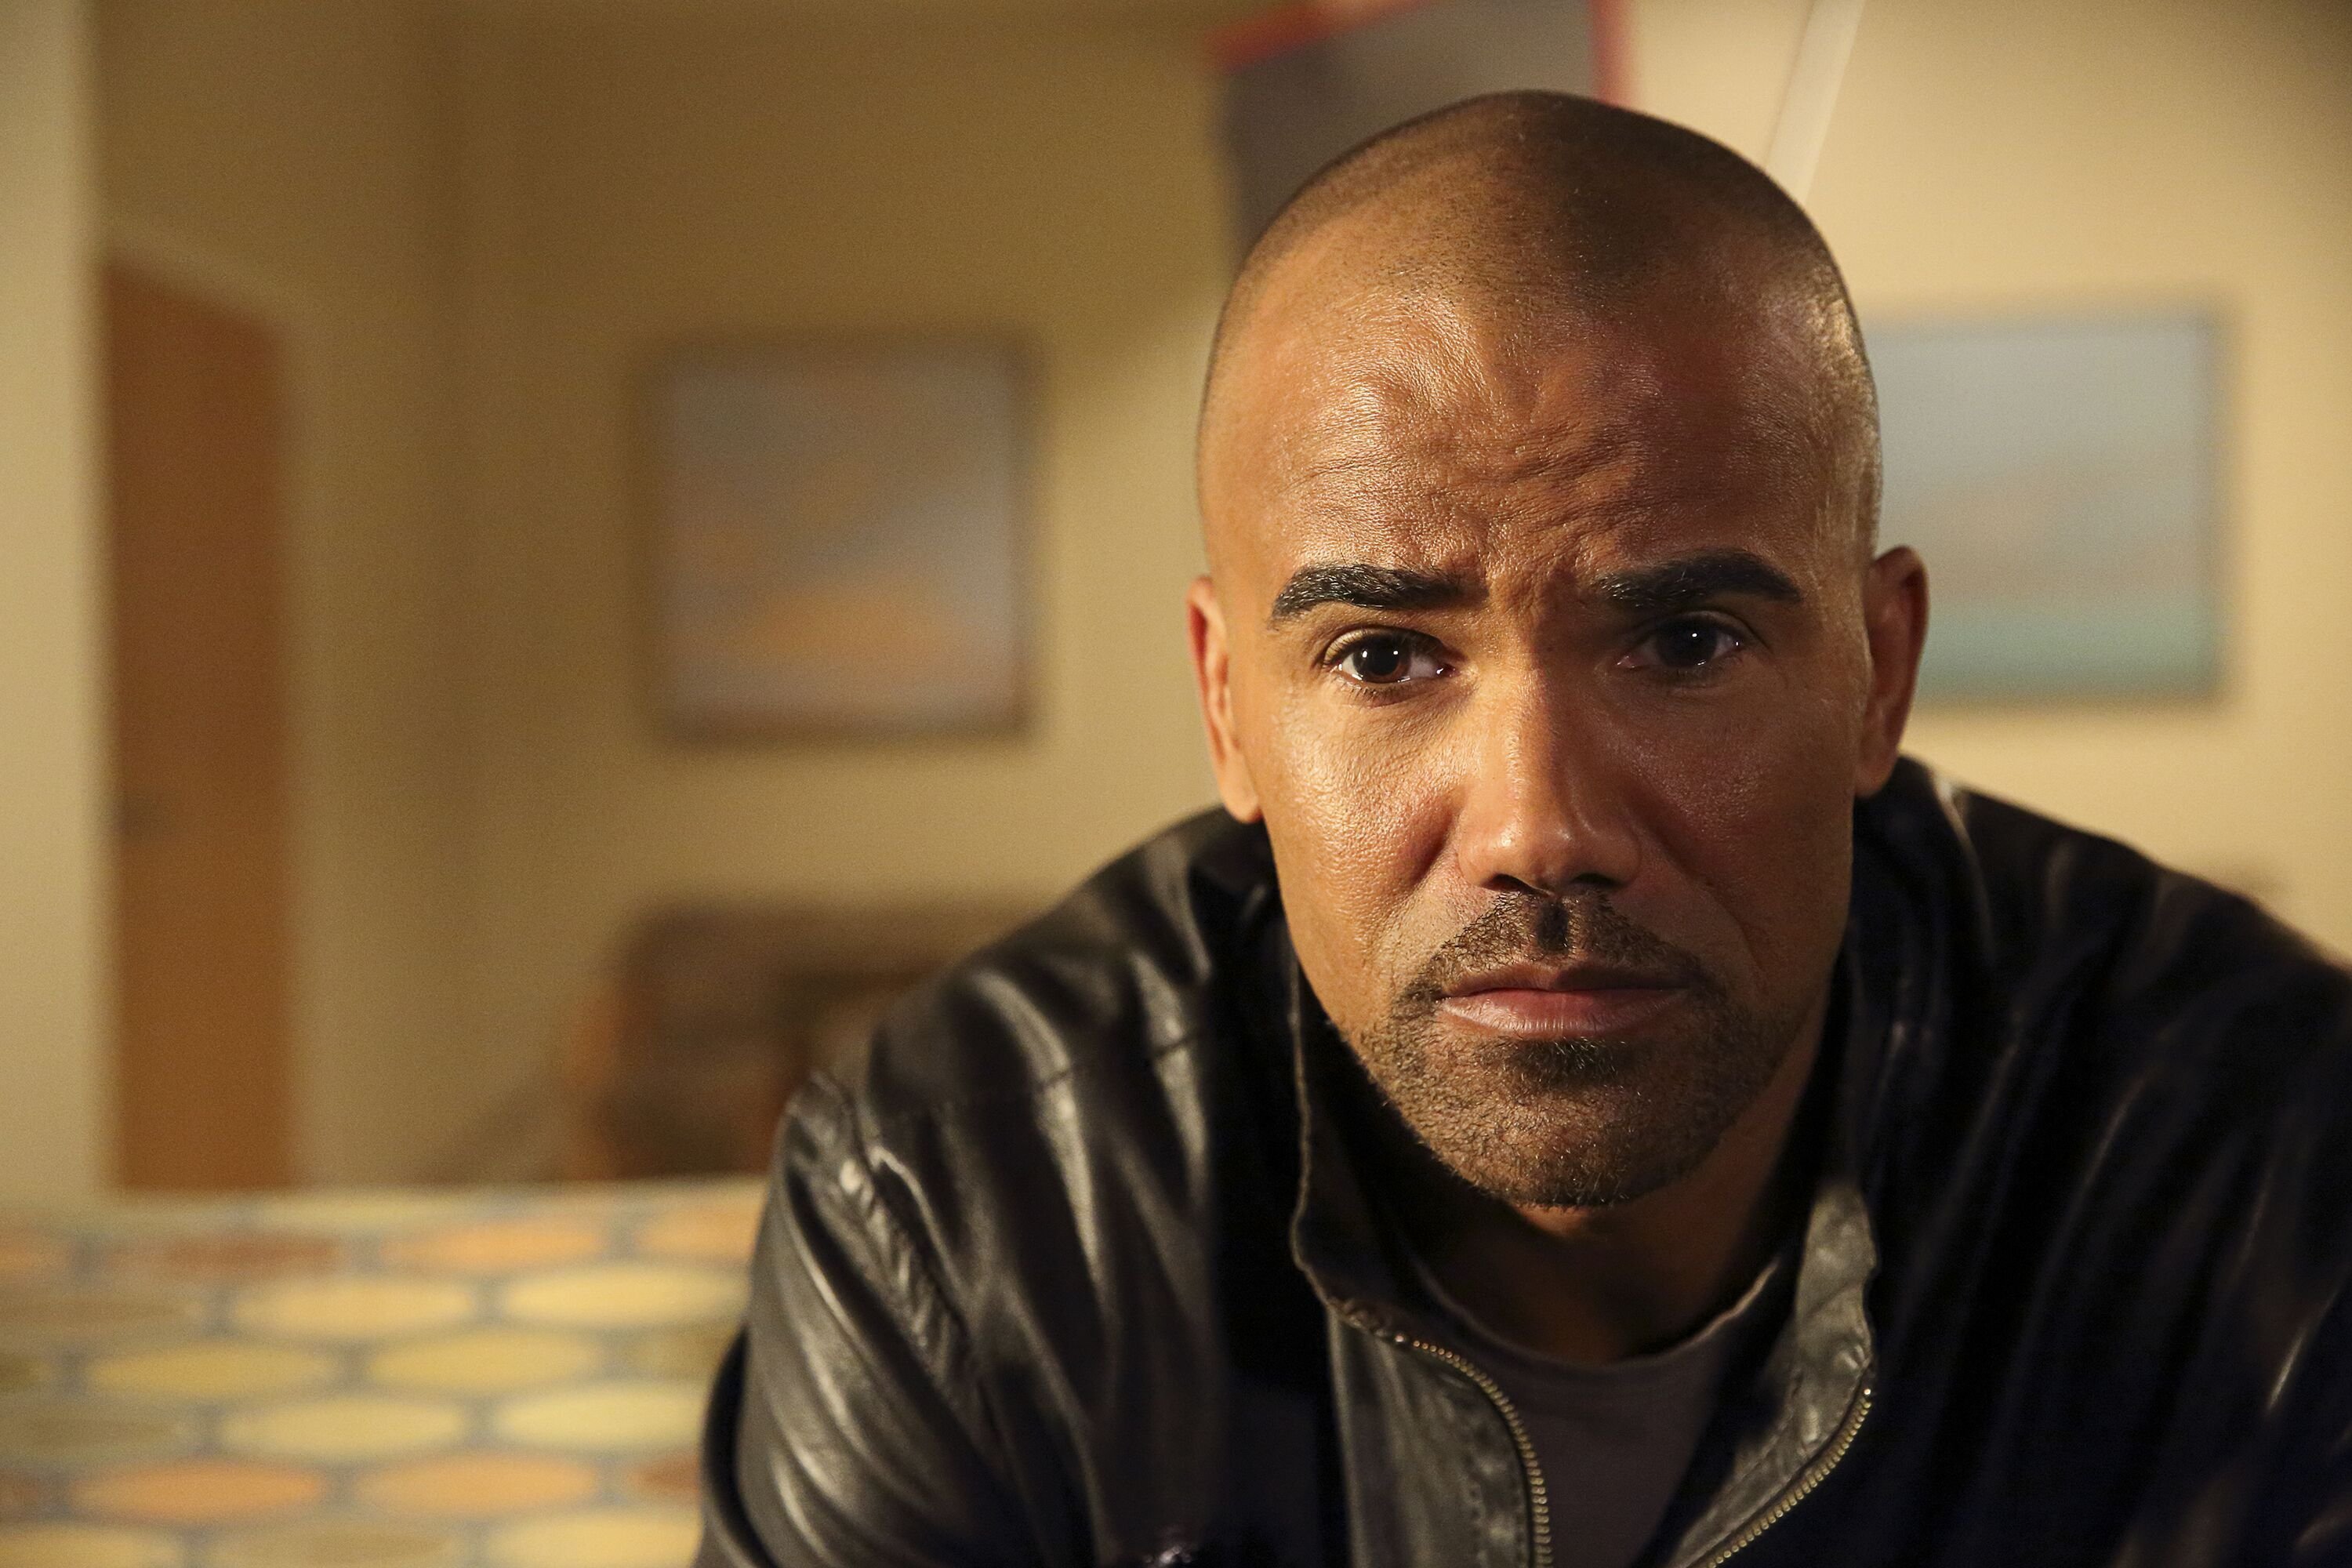 Sheman Moore in "Criminal Minds." | Source: Getty Images